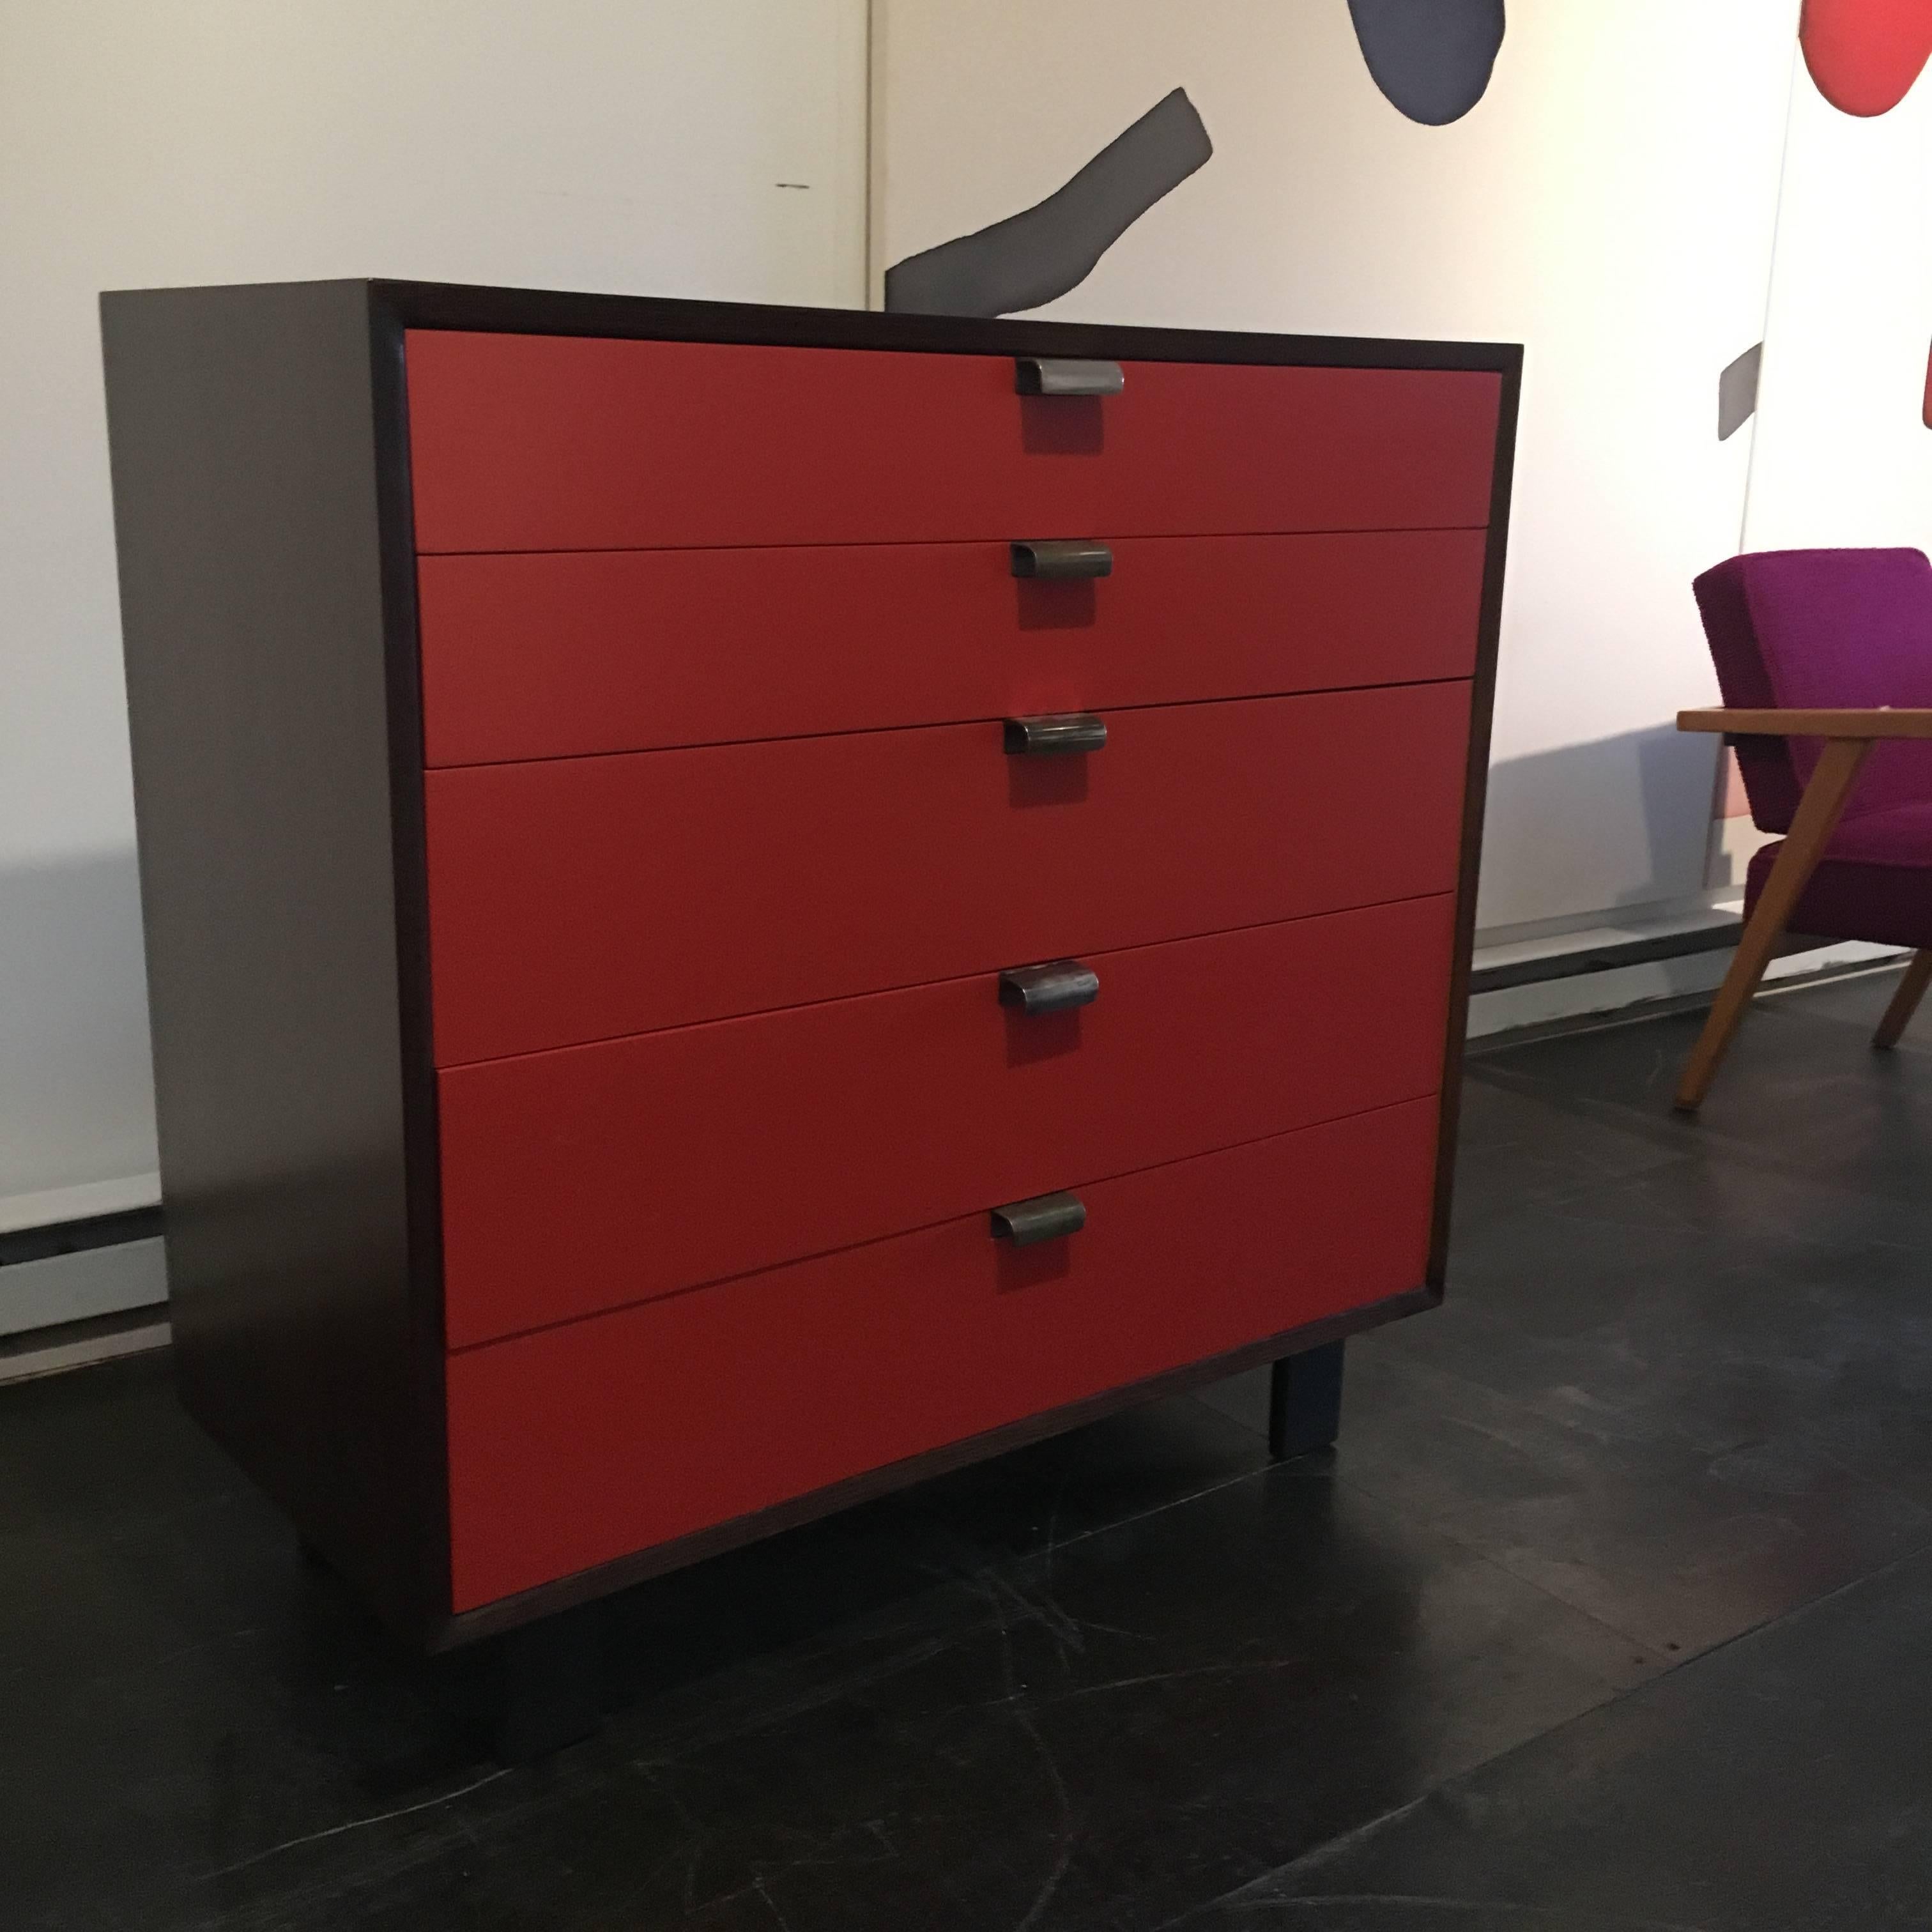 Chest of five drawers with lacquered red front and ebonized casing designed by George Nelson for Herman Miller in 1948.